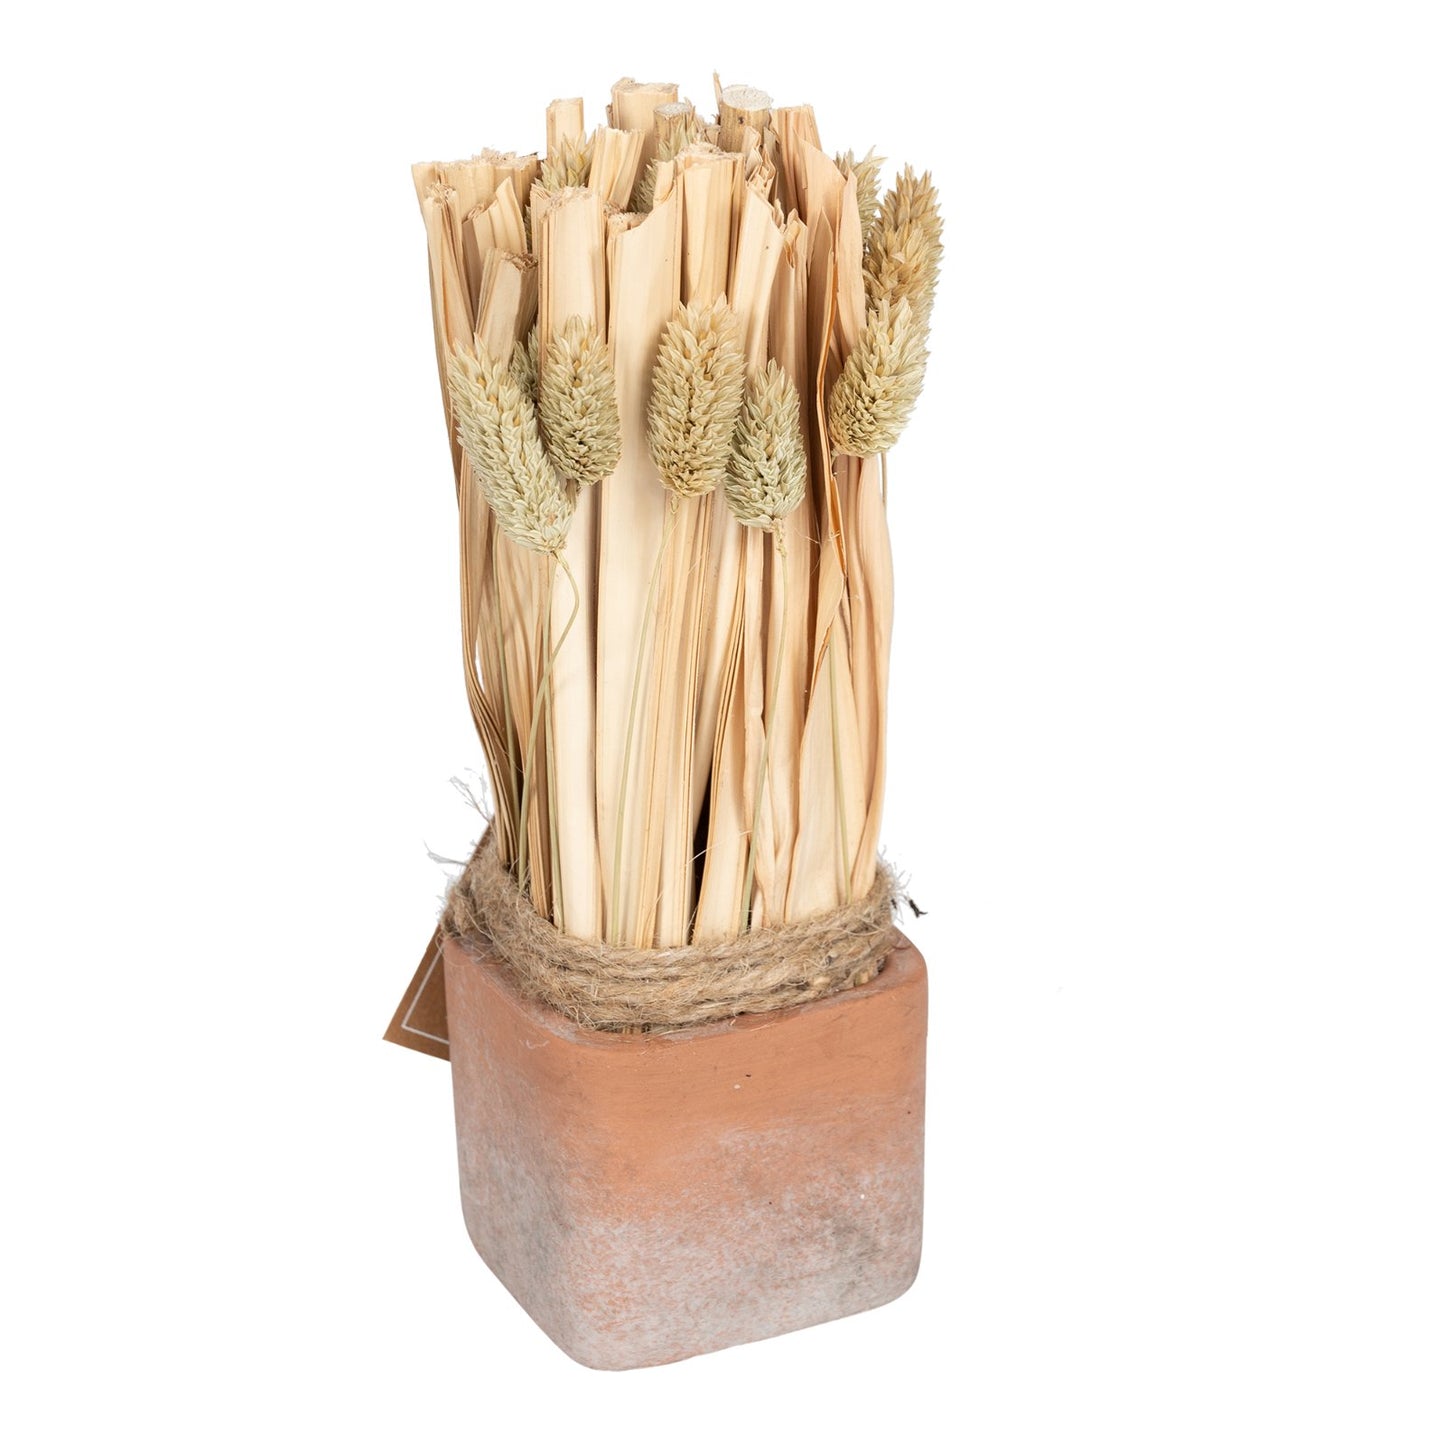 Fox Tail Dried Grass Bouquet in Terracotta Pot - Large